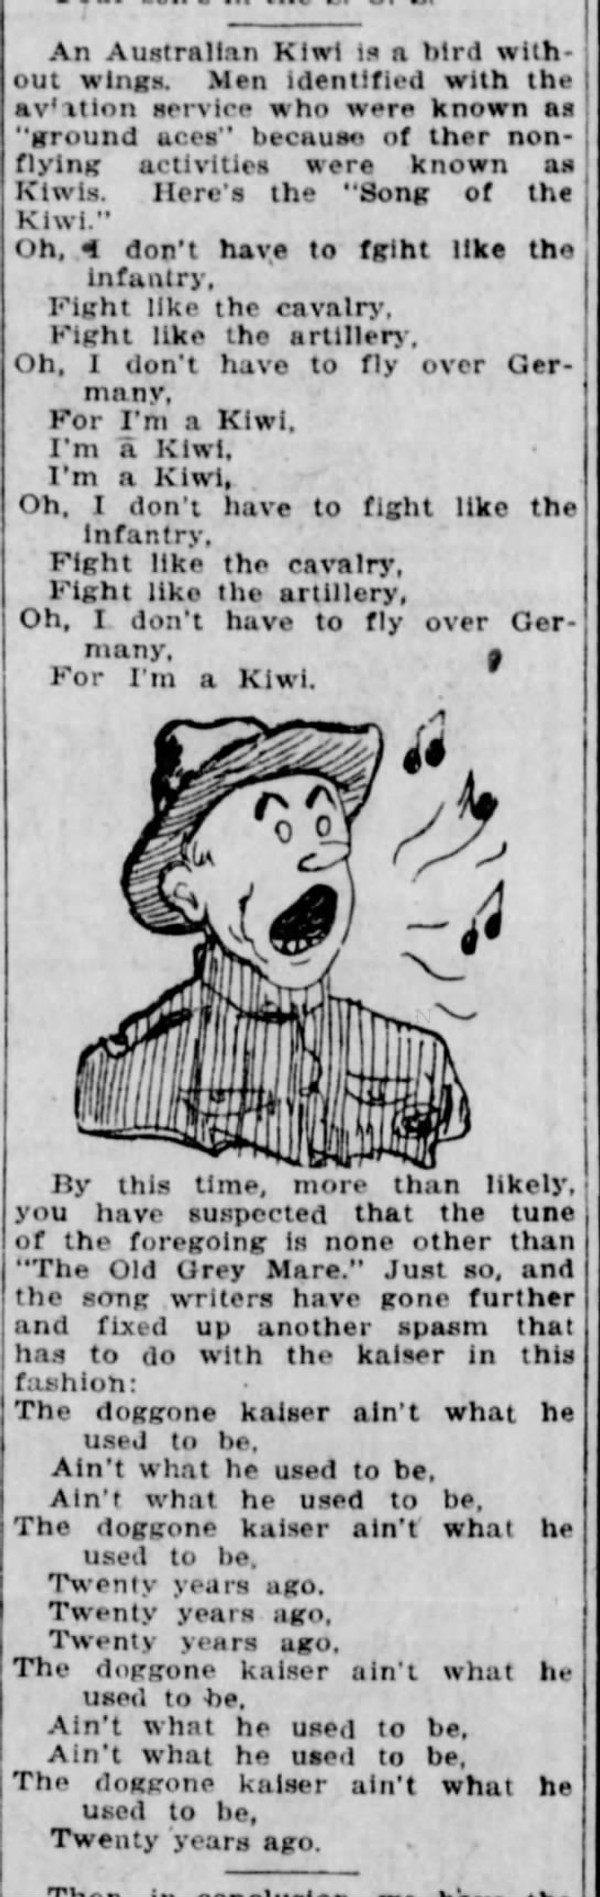 Newspaper article titled I'm a Kiwi. There is a comical illustration of a man in soldiers' uniform with his mouth open and music notes coming out if it.